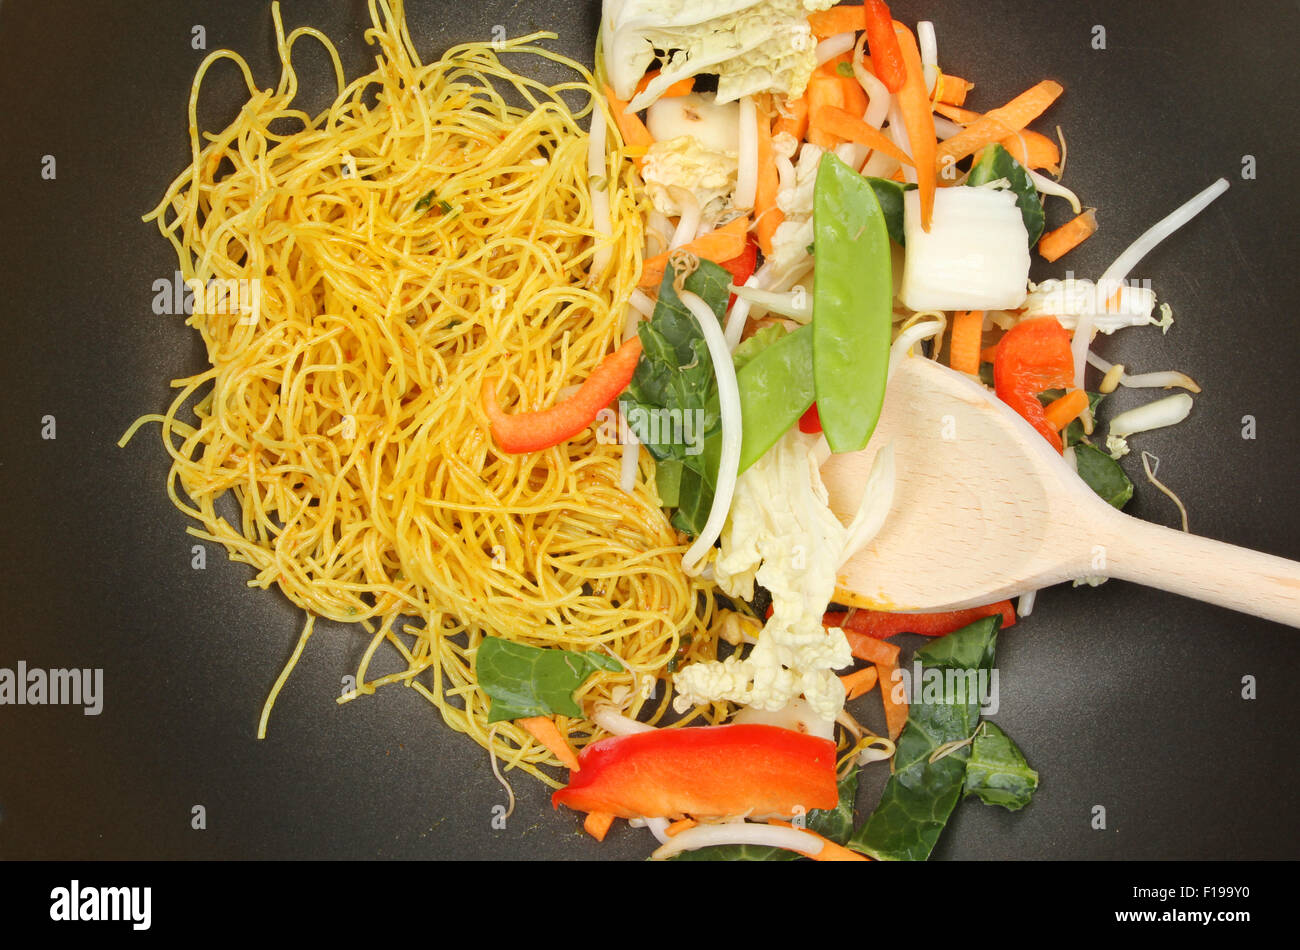 Closeup of stir fry vegetables and Singapore noodles with a wooden spoon in a wok Stock Photo